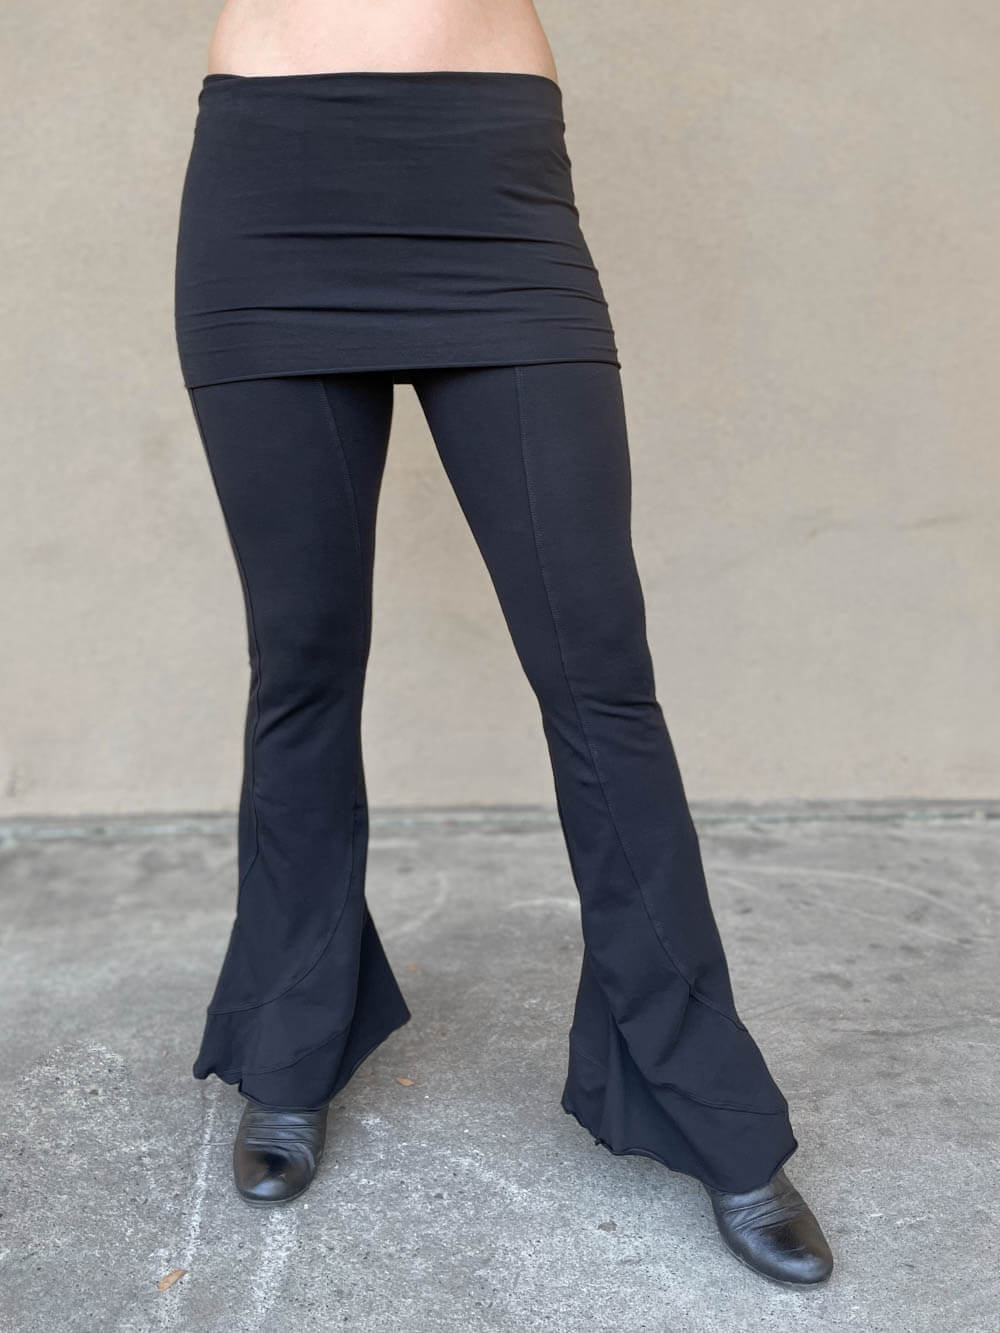 Women's Sports Pants With Skirt Overlay, Suitable For Yoga